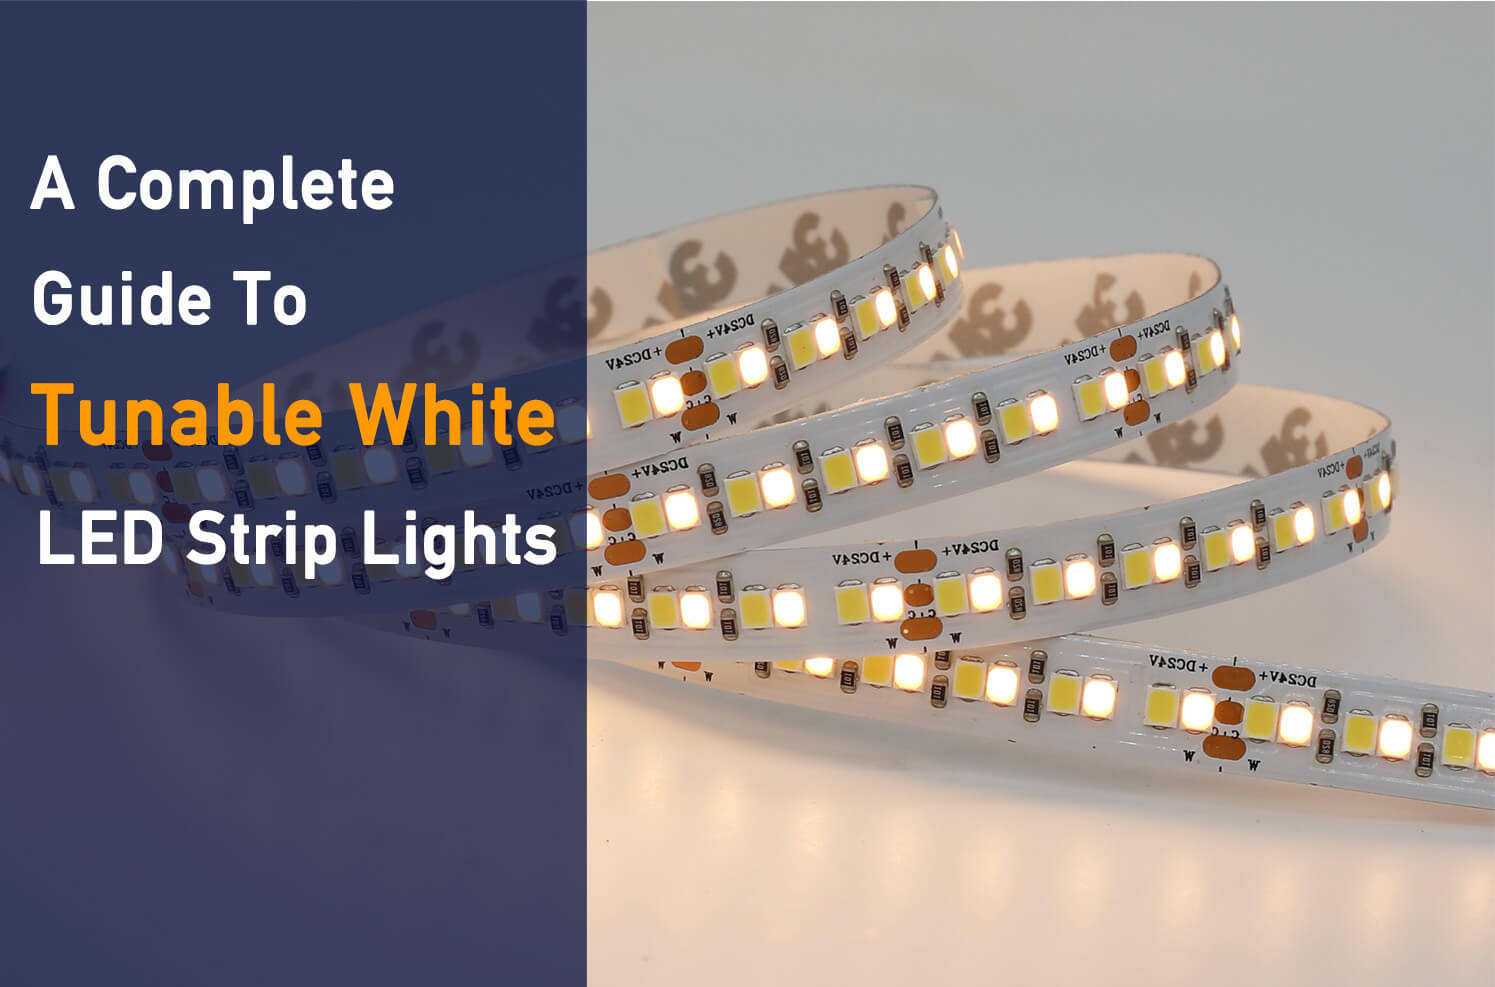 LED Guide - Part 1: Connecting LED strips - very simple 